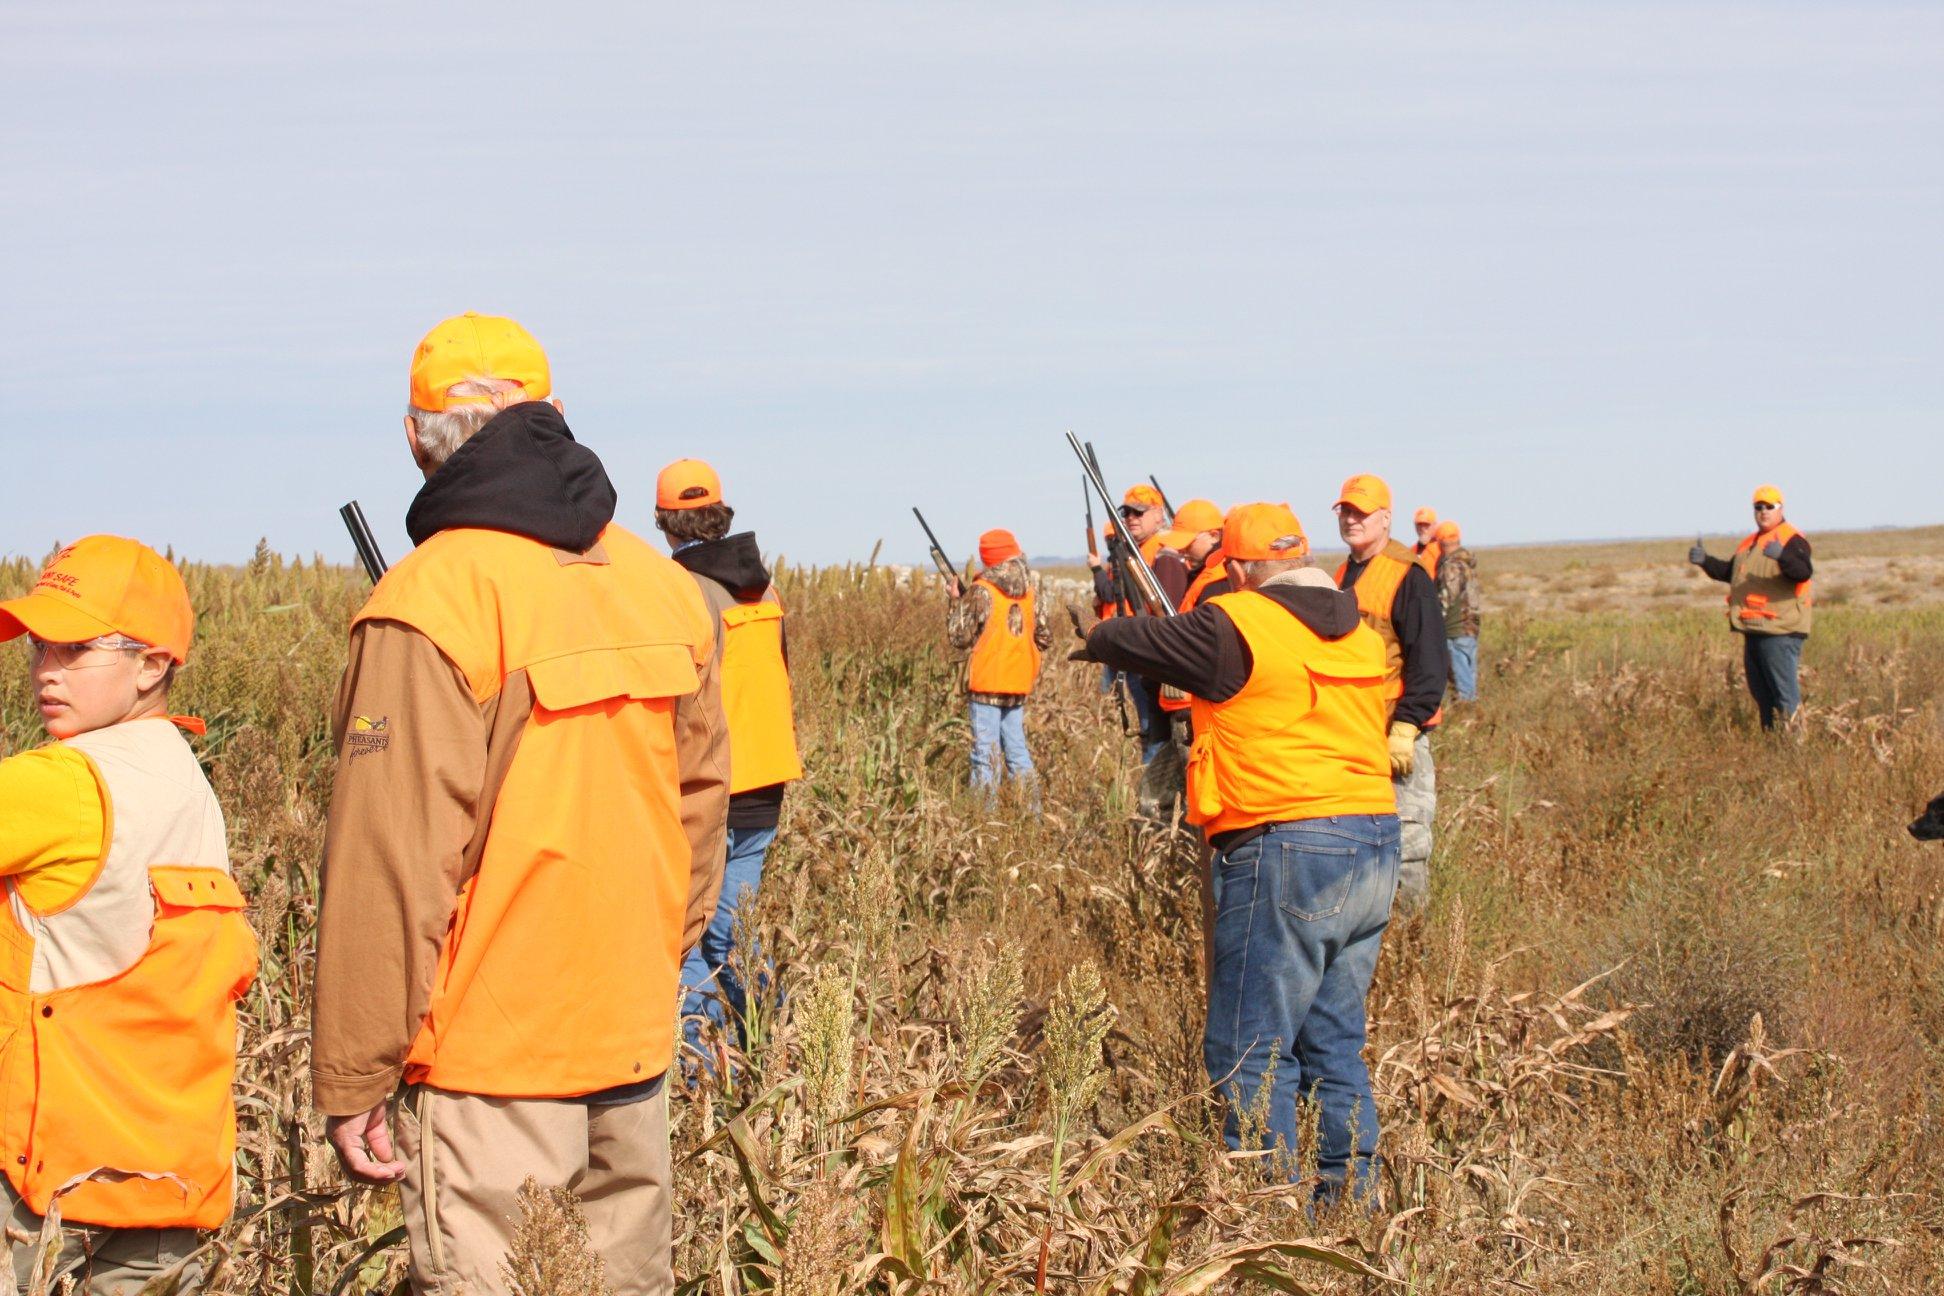 Pheasant hunters in the field